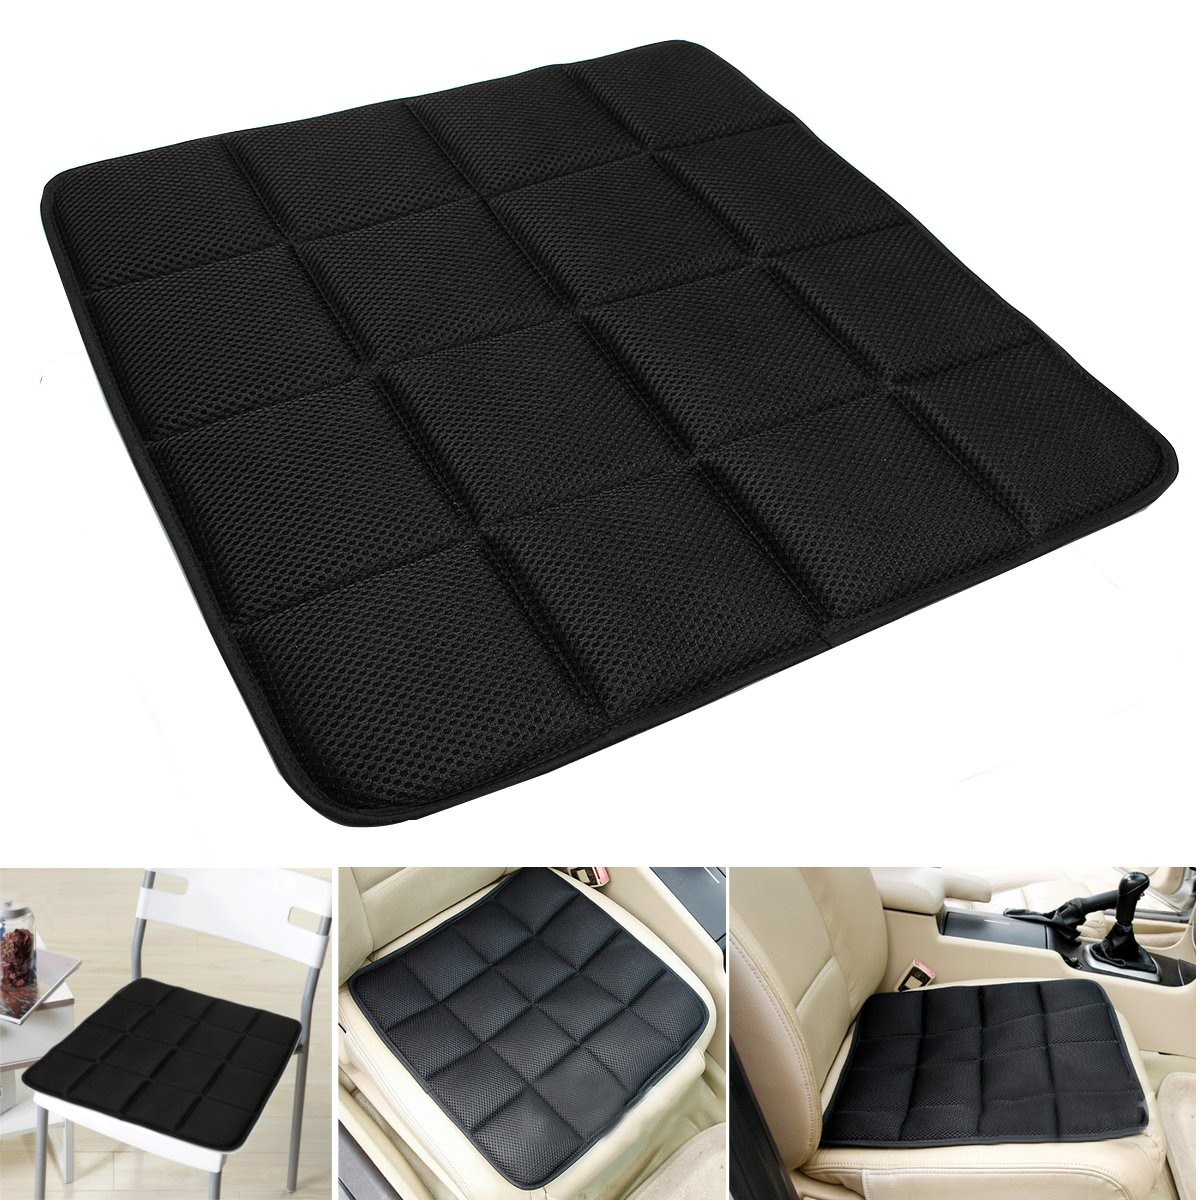 

Bamboo Charcoal Breathable Seat Cushion Cover Pad Mat For Car Office Chair Black